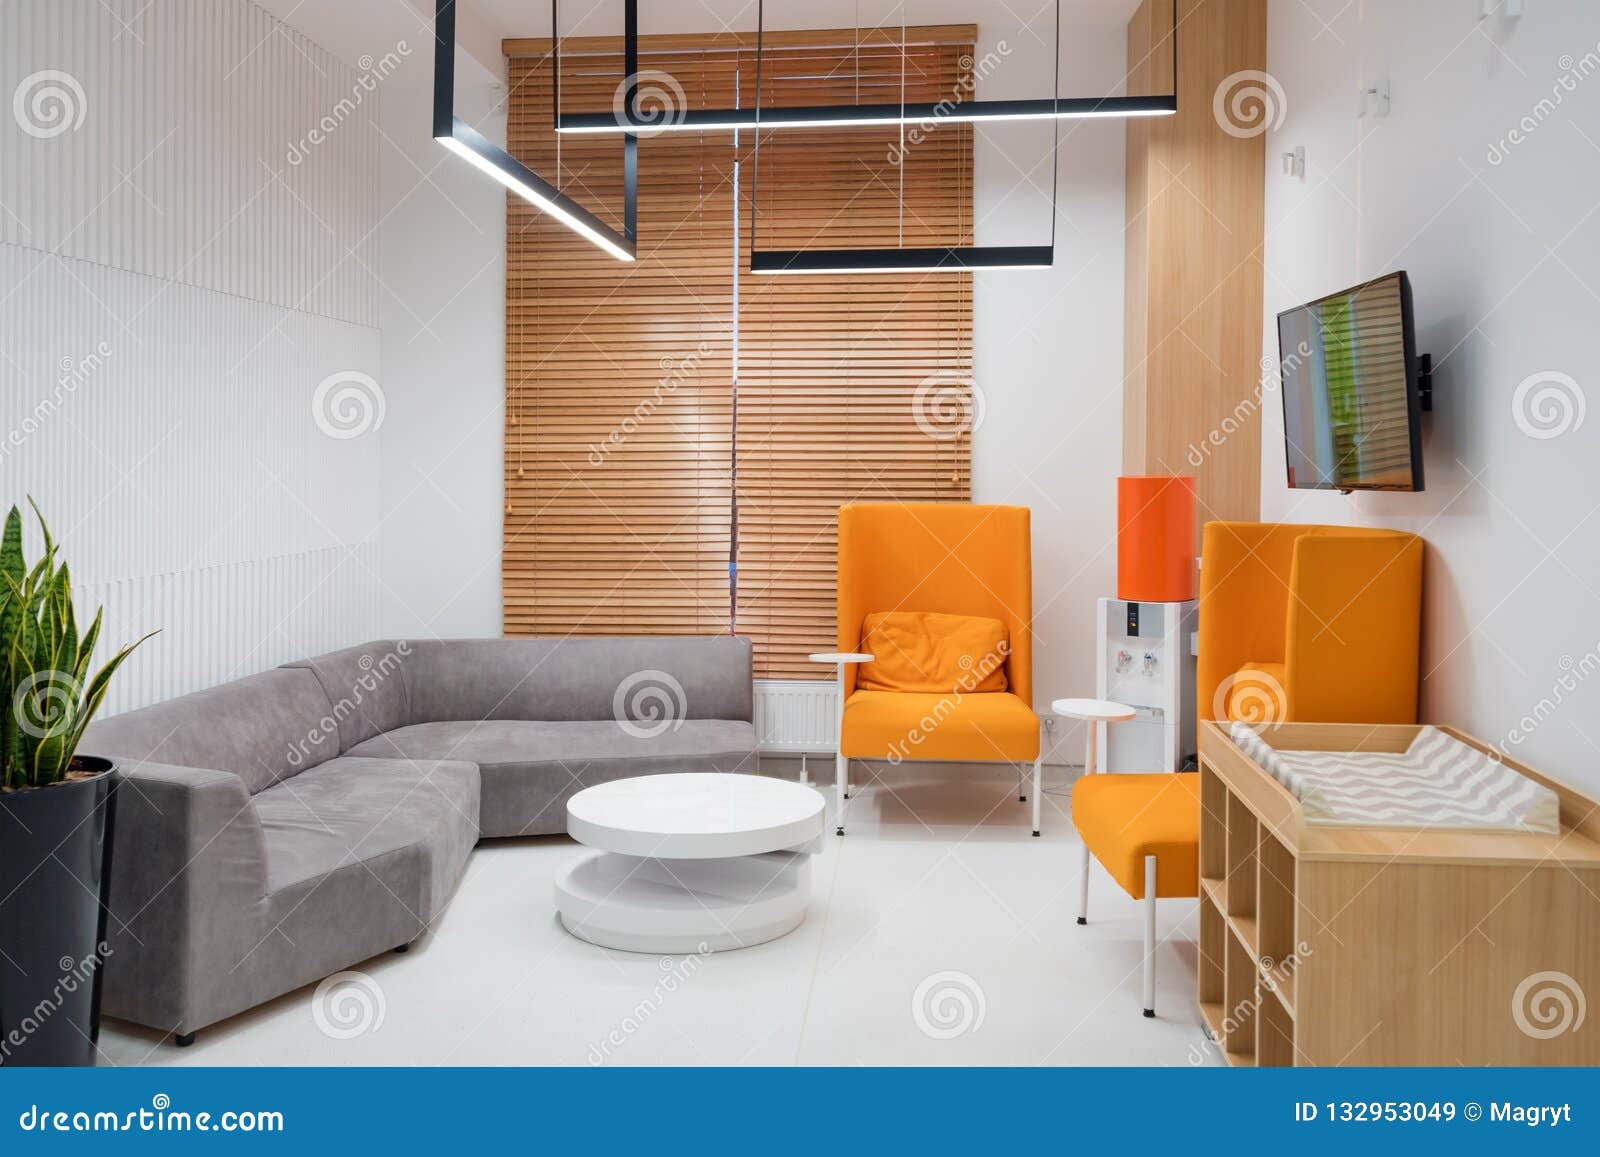 Interior Of A Modern Hospital Waiting Room Clinical With